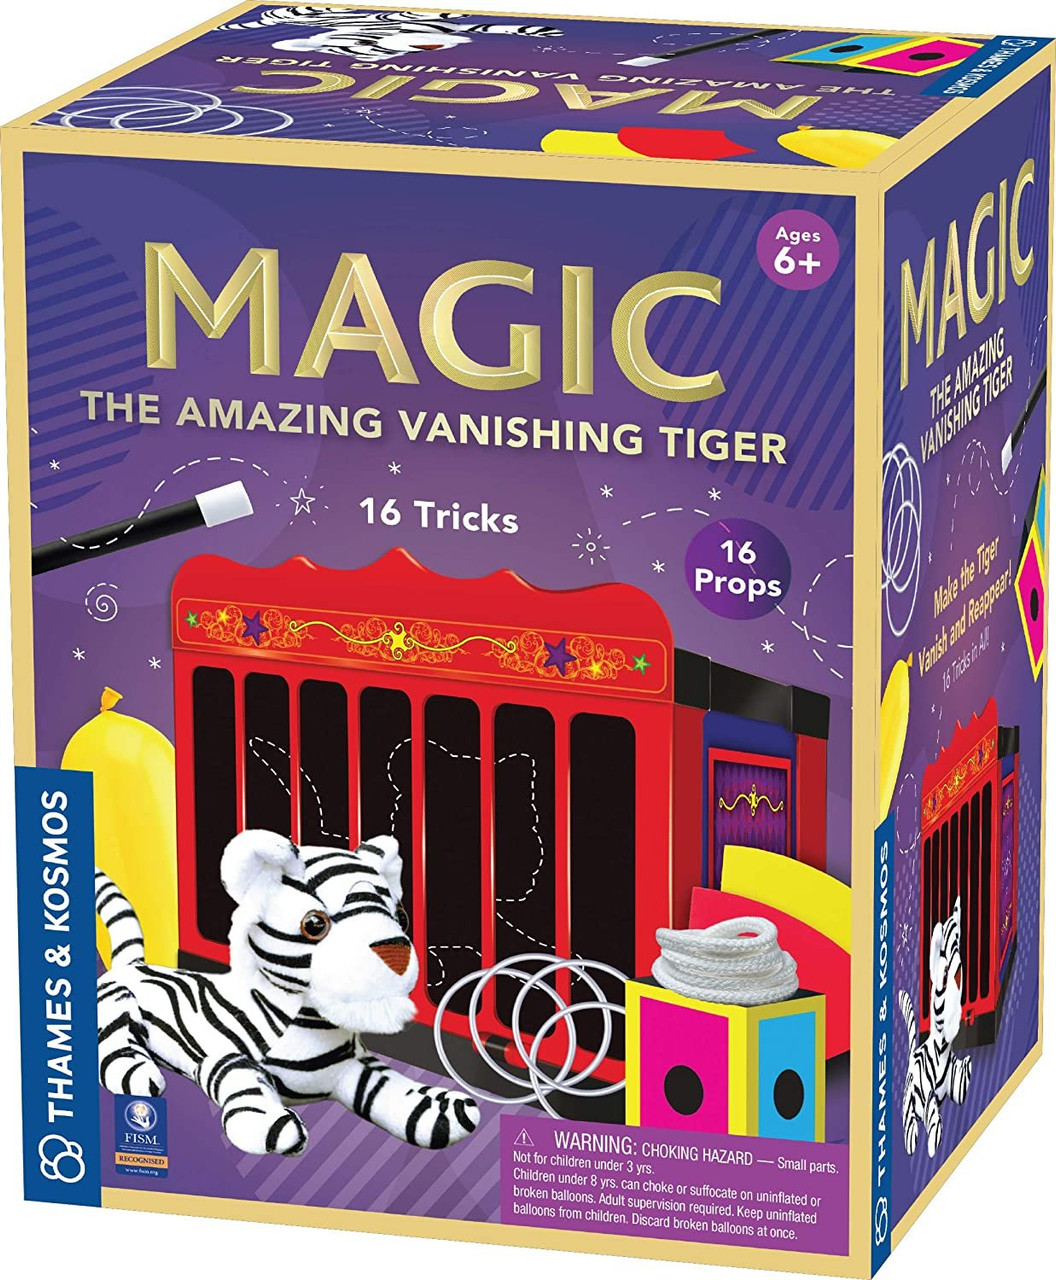 Playkidz Magic Trick for Kids Set 3 - Magic Set with Over 35 Tricks Made  Simple, Magician Pretend Play Set with Wand & More Magic Tricks - Easy to  Learn Instruction Manual 